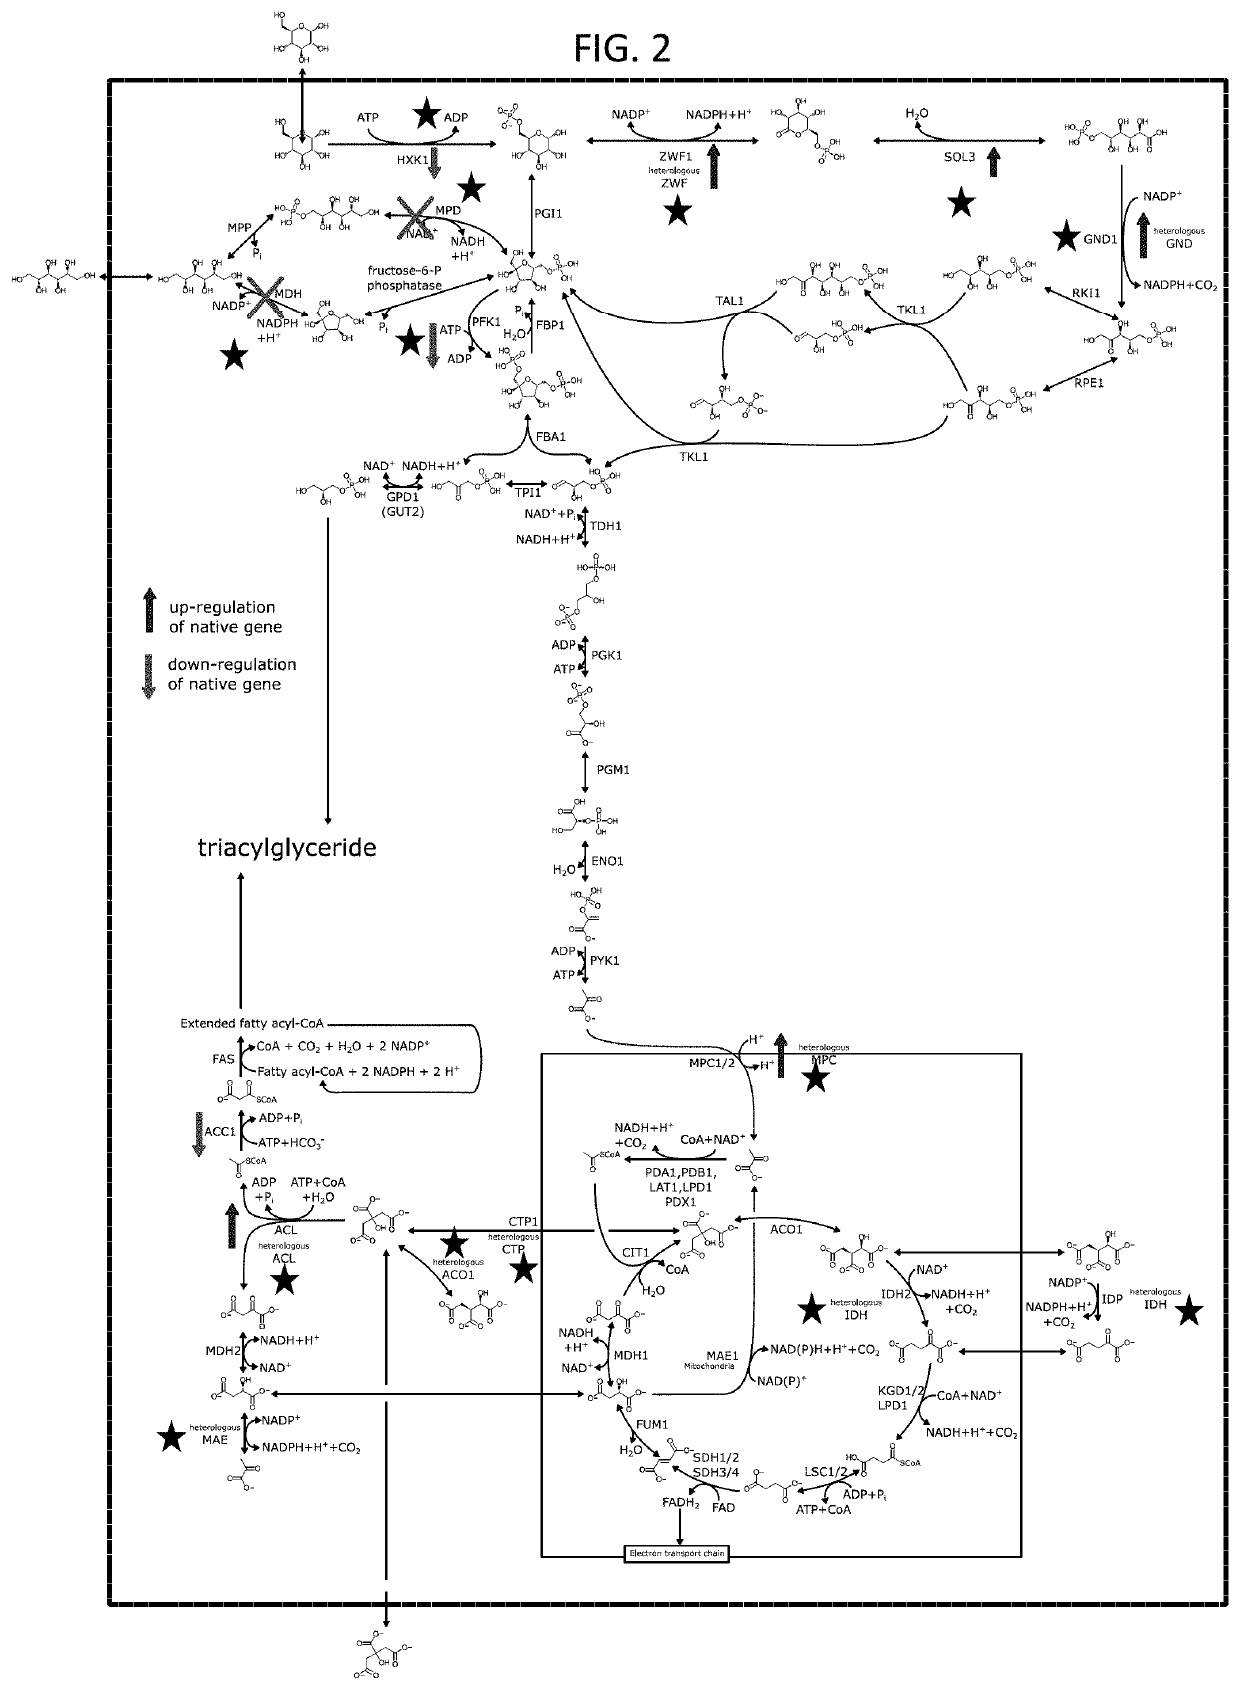 Multi-substrate metabolism for improving biomass and lipid production